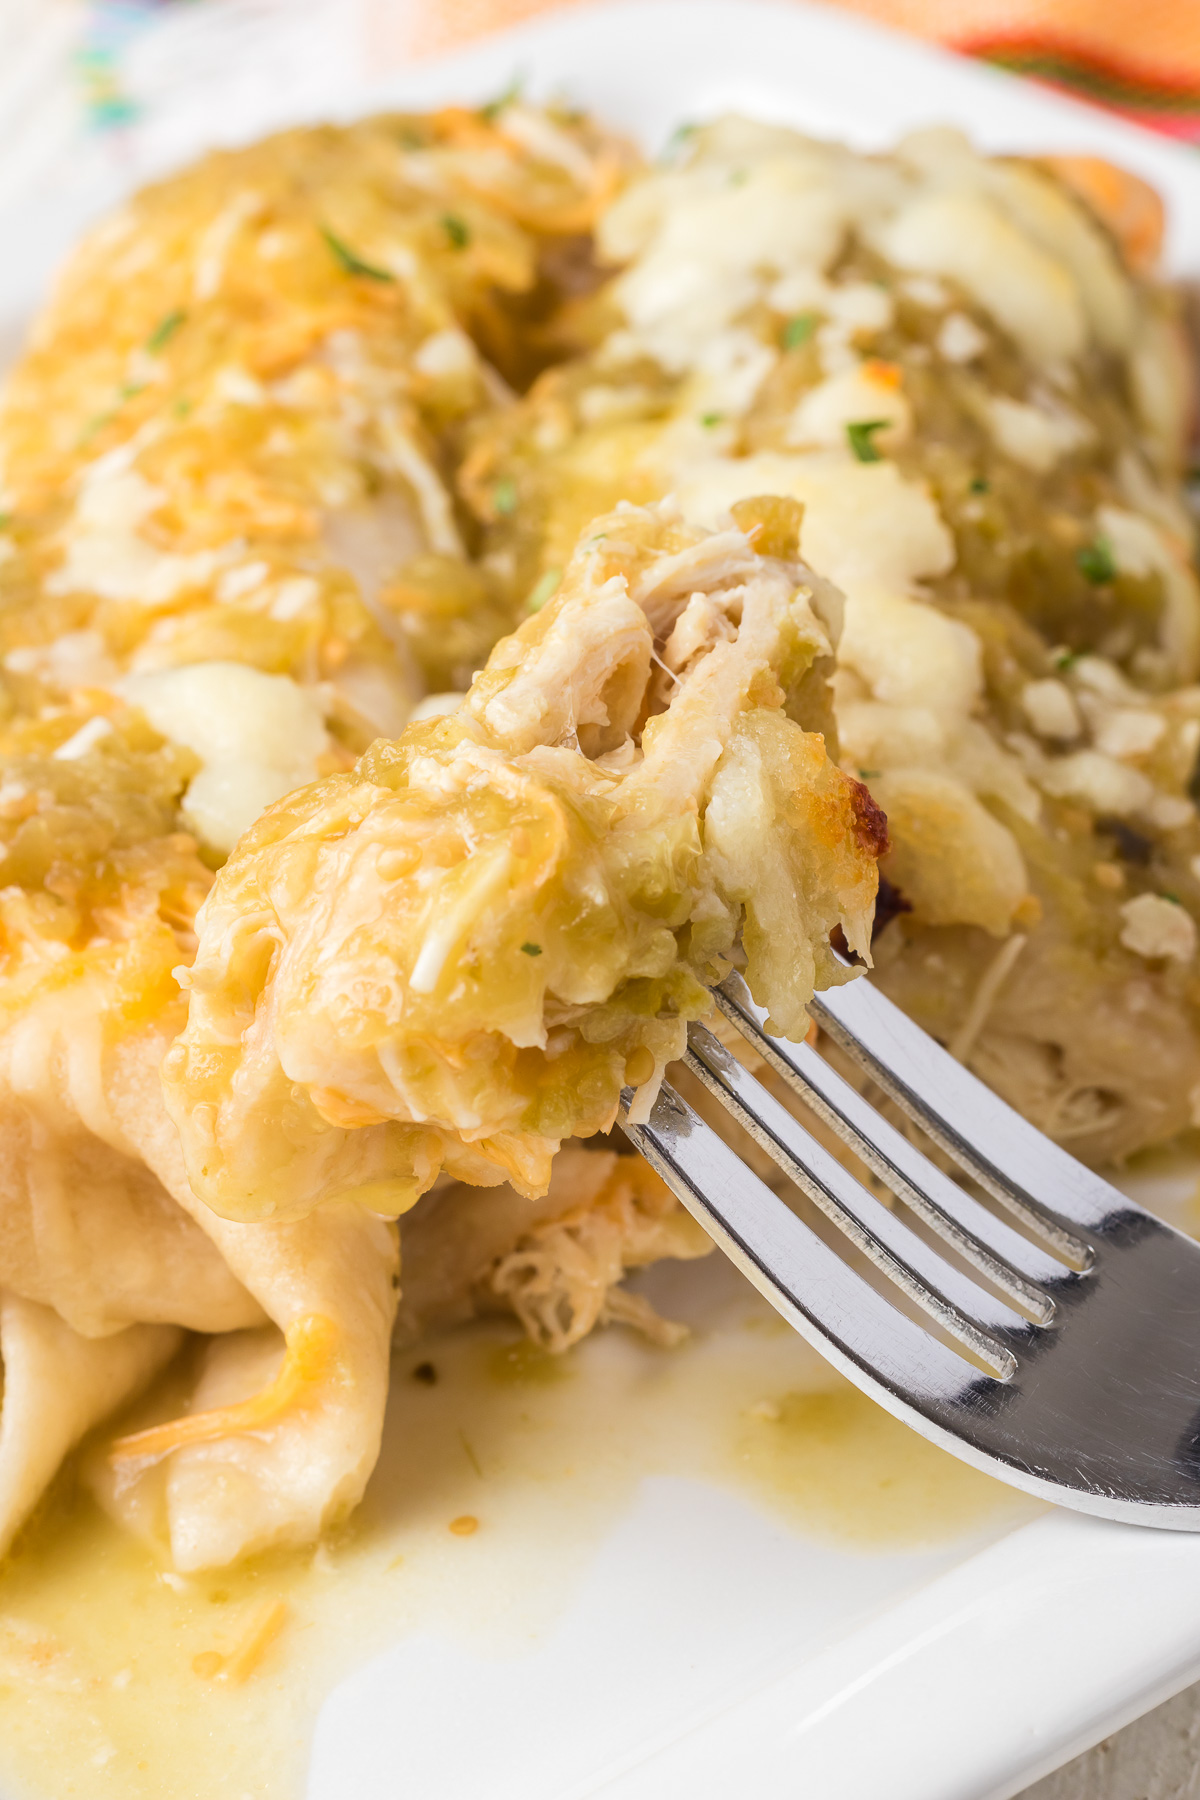 These Cheesy Chicken Enchiladas are saucy, cheesy, and downright delicious. If there's one thing we can all agree on, it's that gooey melted cheese makes everything better, and when it blankets tender, seasoned chicken rolled up in warm tortillas and smothered in zesty enchilada sauce, well, you've just hit the culinary jackpot. via @foodhussy